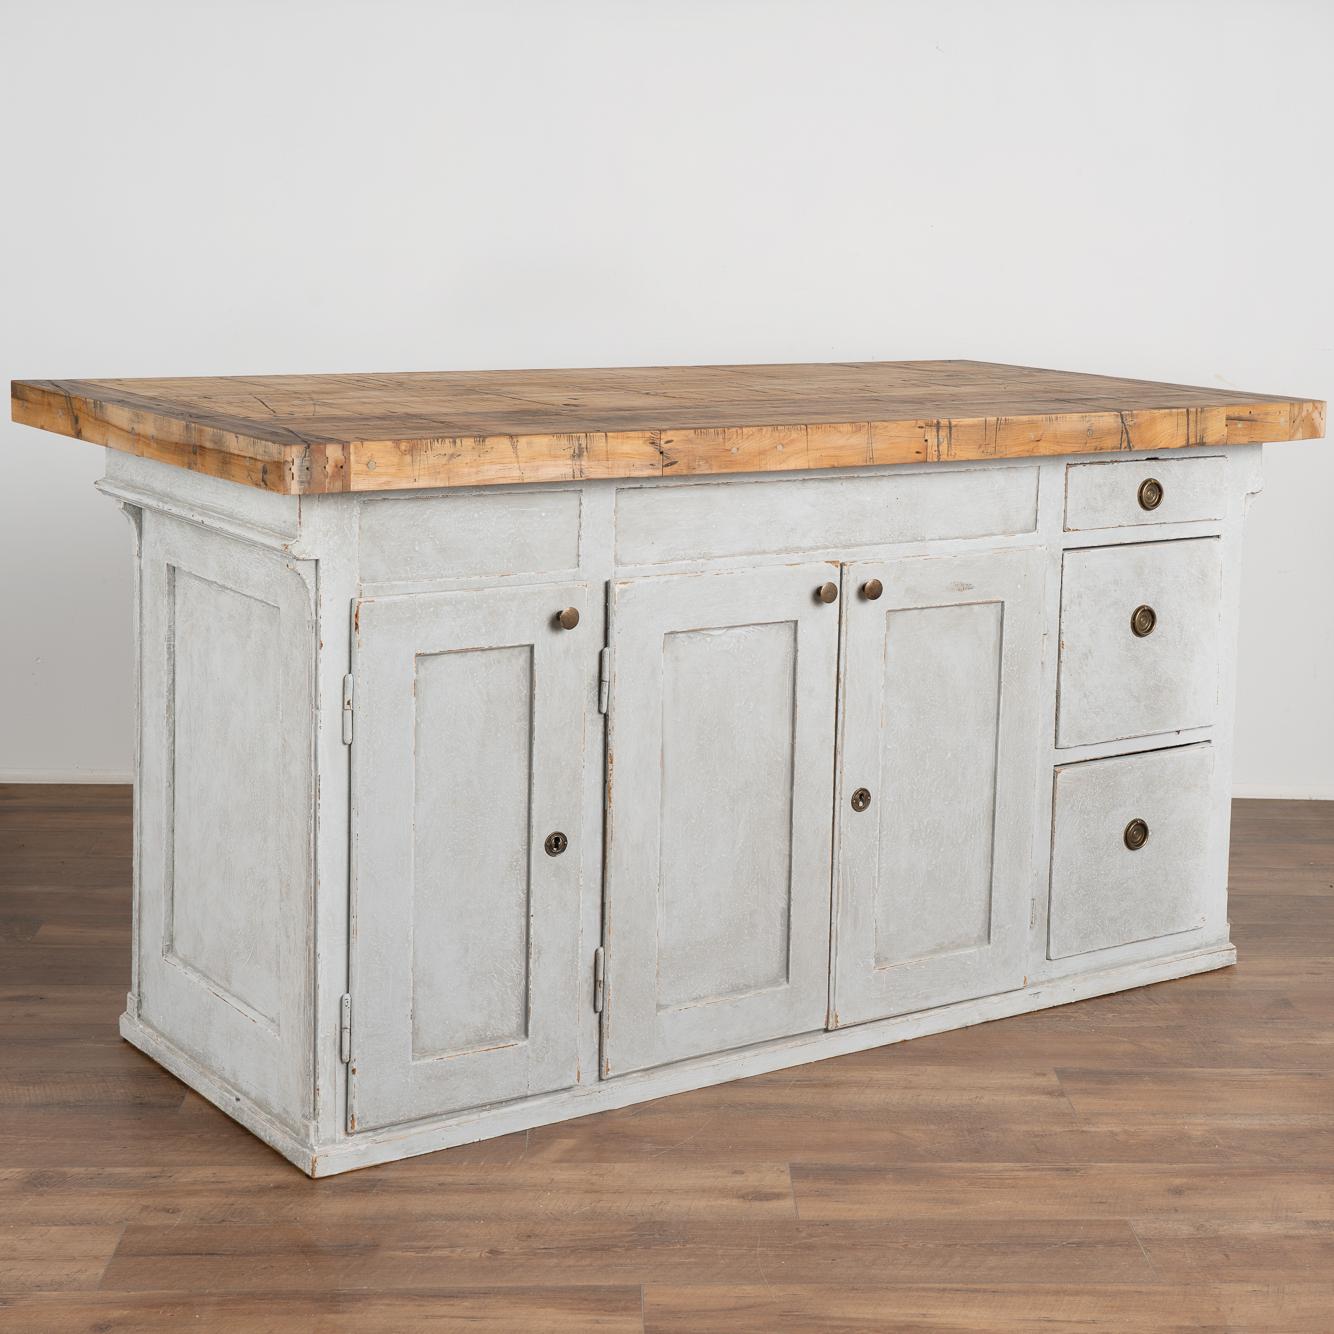 This old pine shop counter from Sweden has been given new life with a professional gray painted finish creating a fresh look for a modern kitchen island.
The top is made from old boxcar flooring (from a train); thick and heavy, it is filled with